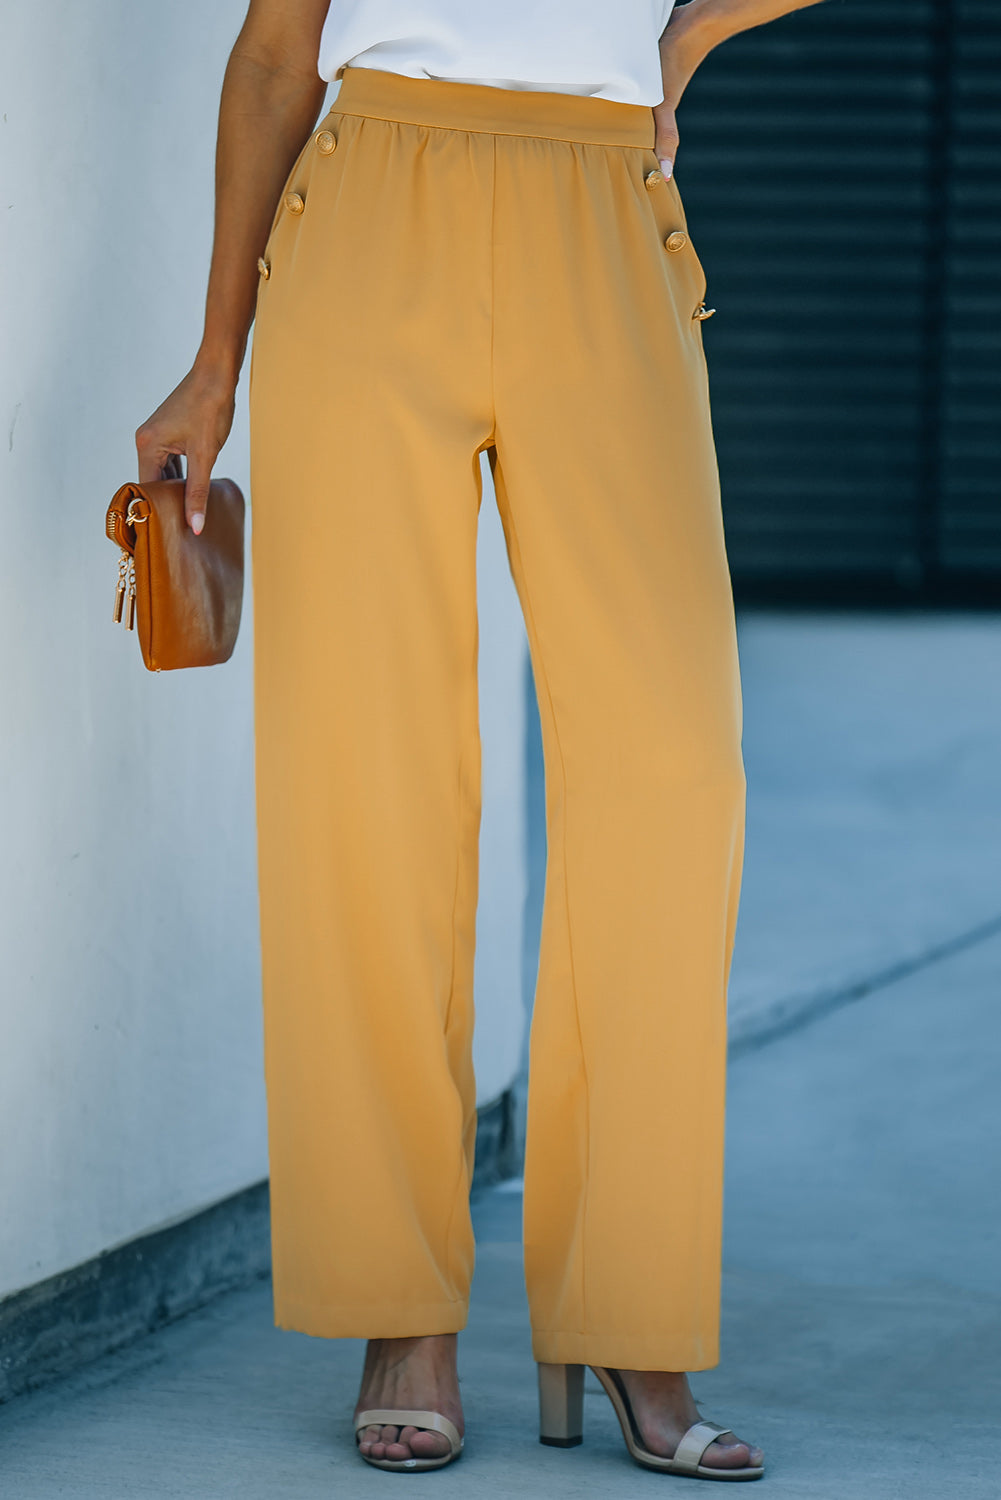 Women's Yellow High Waisted Elastic Band Wide Leg Pants with Pockets that have decorative gold buttons